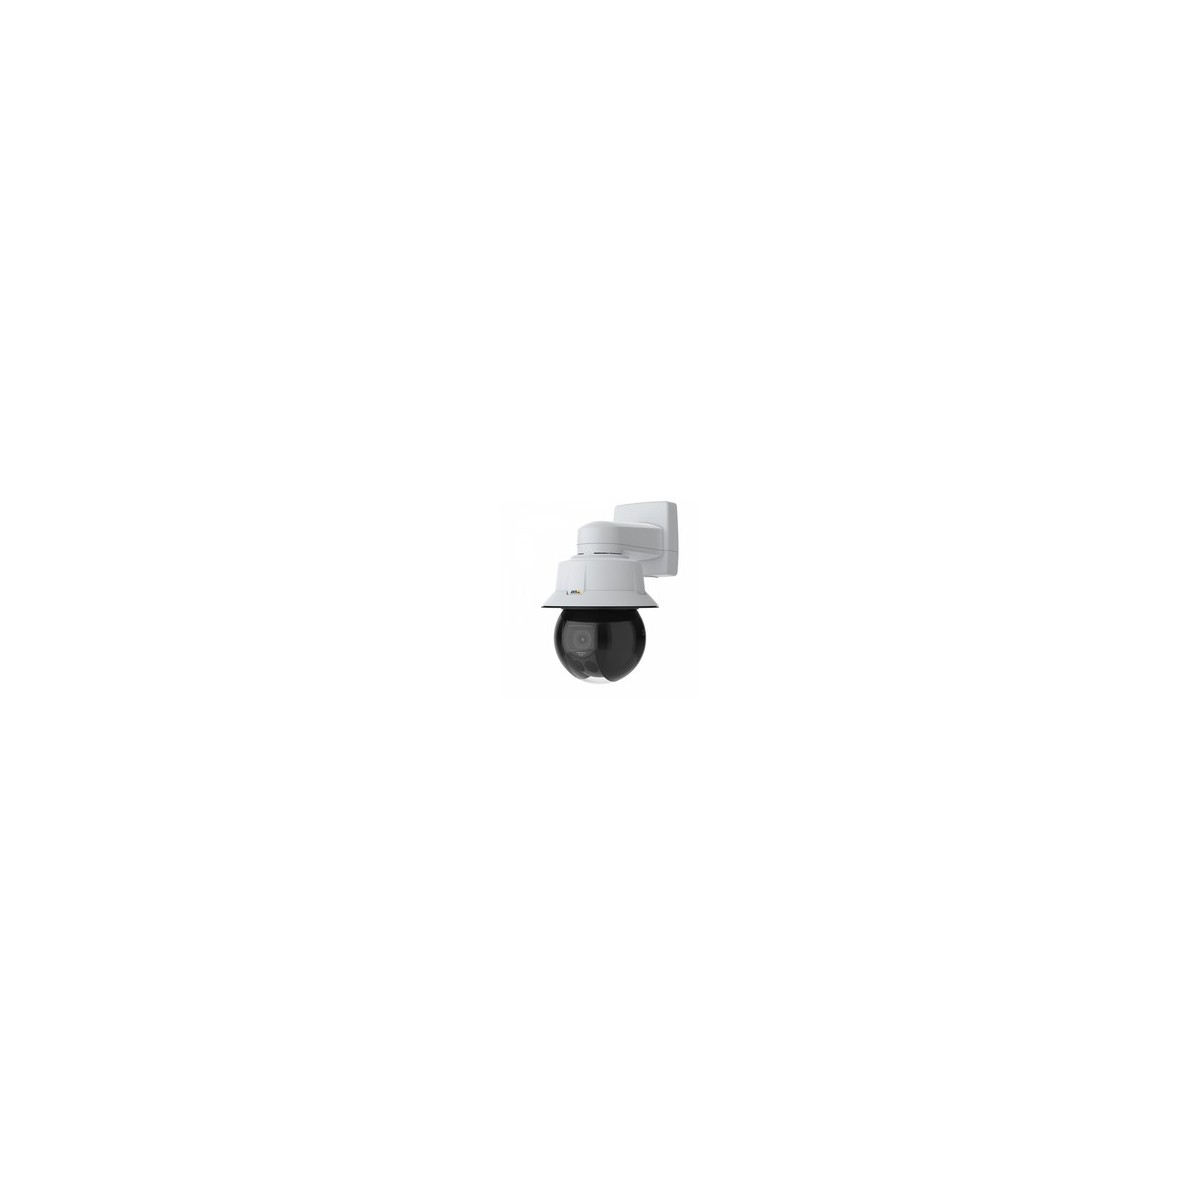 Axis 02446-003 - IP security camera - Outdoor - Wired - ARTPEC-7 - Simplified Chinese - Traditional Chinese - Czech - German - D